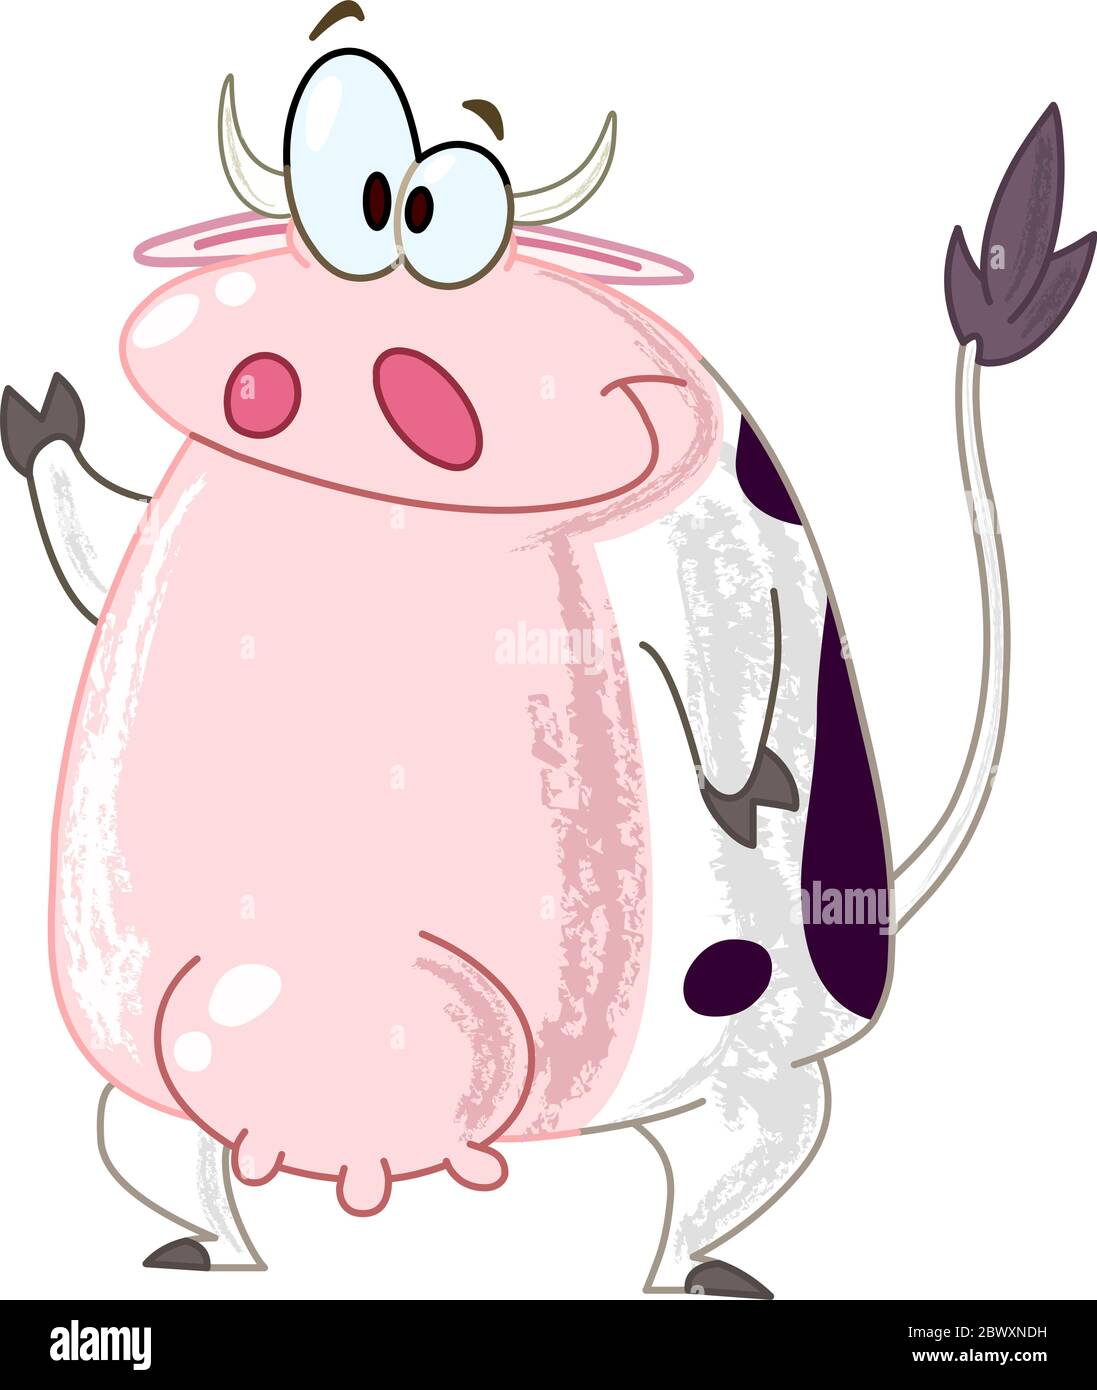 Smiling cow waving with her hand Stock Vector